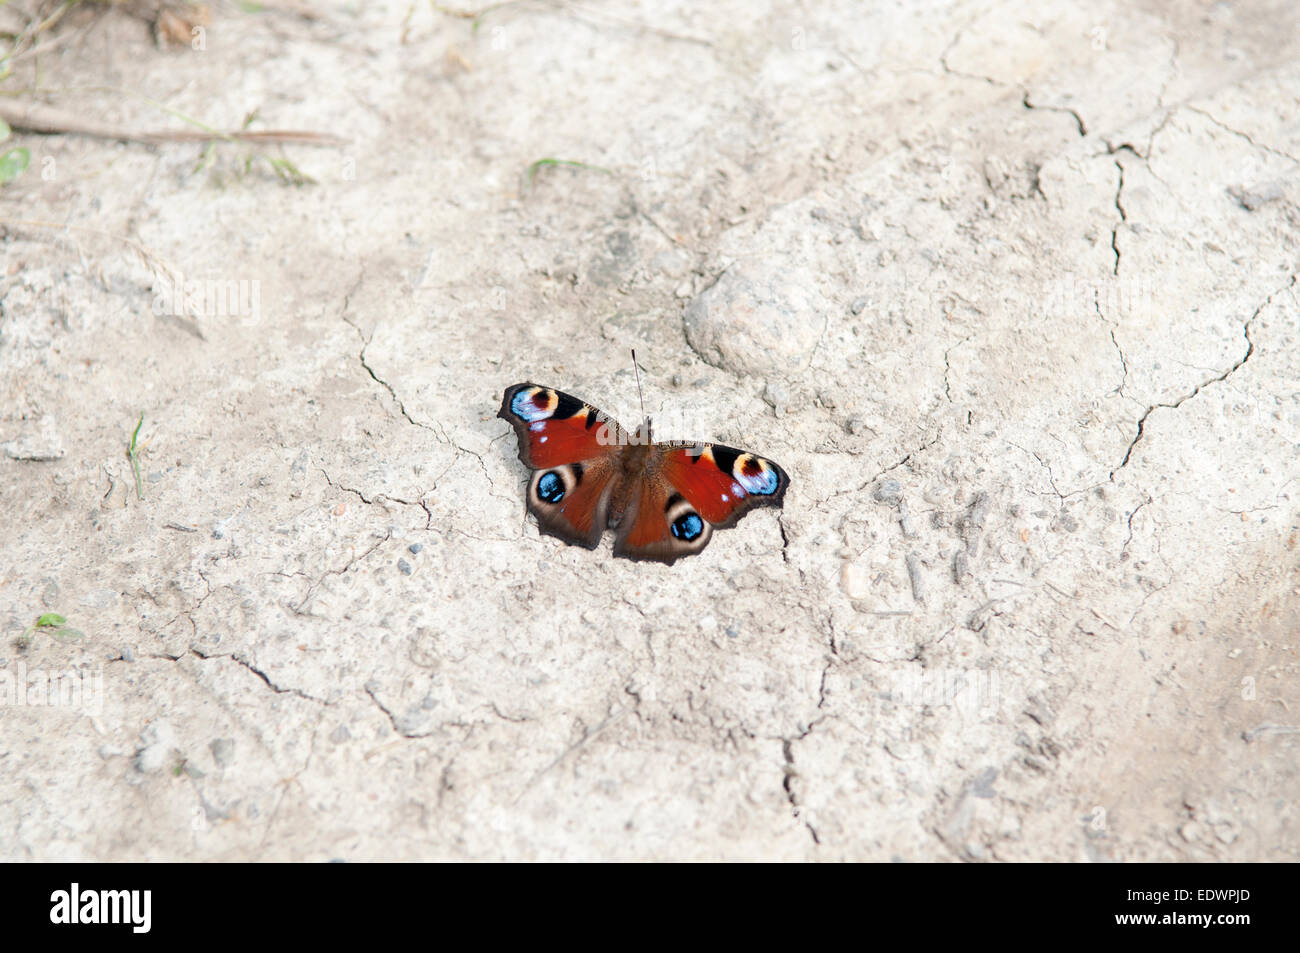 Dead peacock butterfly on the earth. Stock Photo